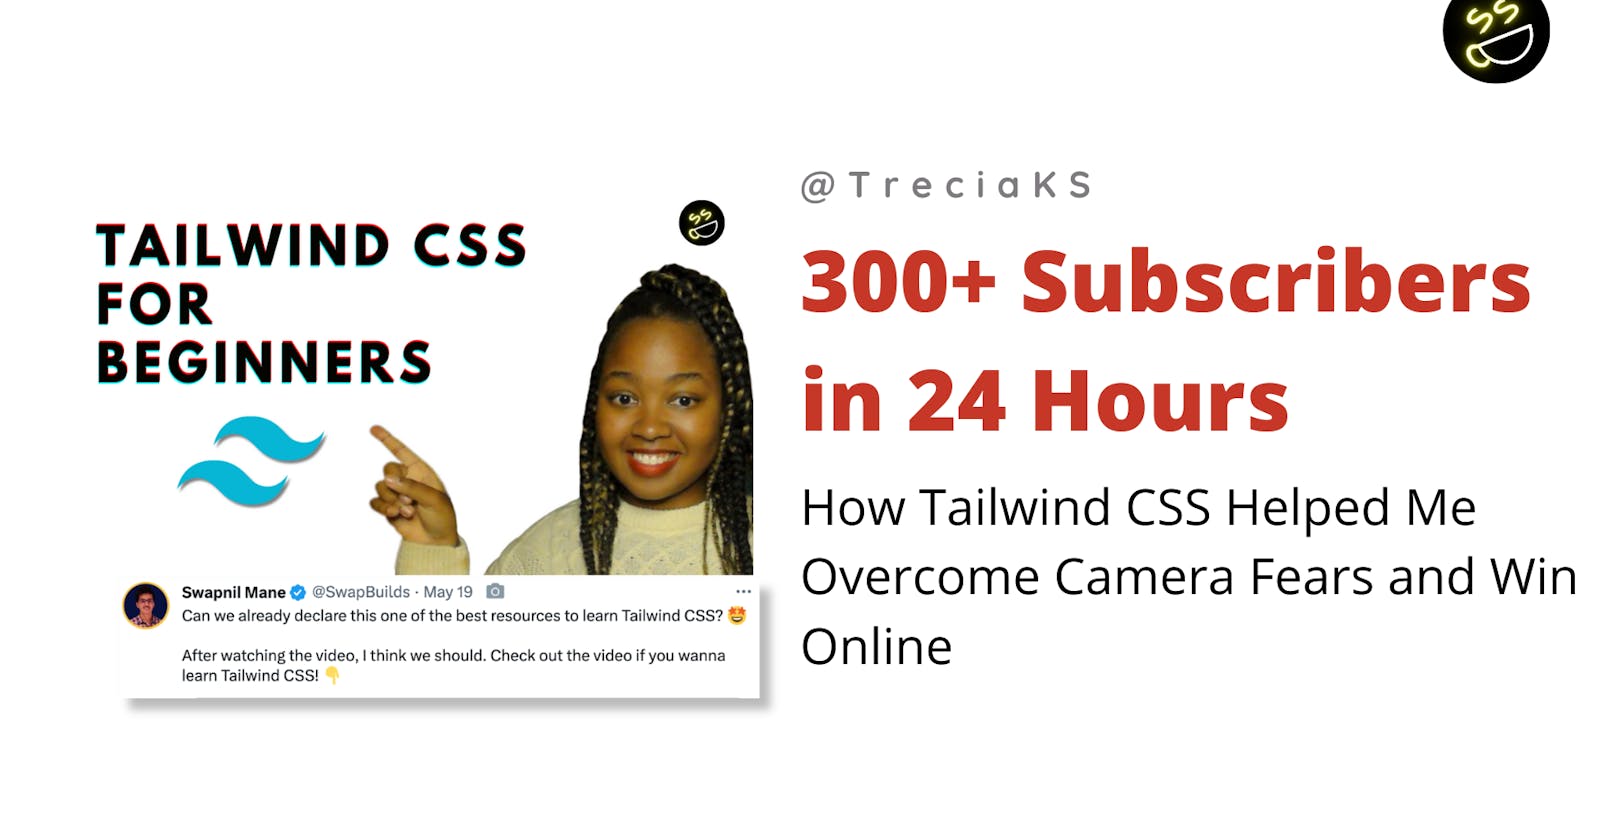 300+ Subscribers in 24 Hours: How Tailwind CSS Helped Me Overcome Camera Fears and Win Online